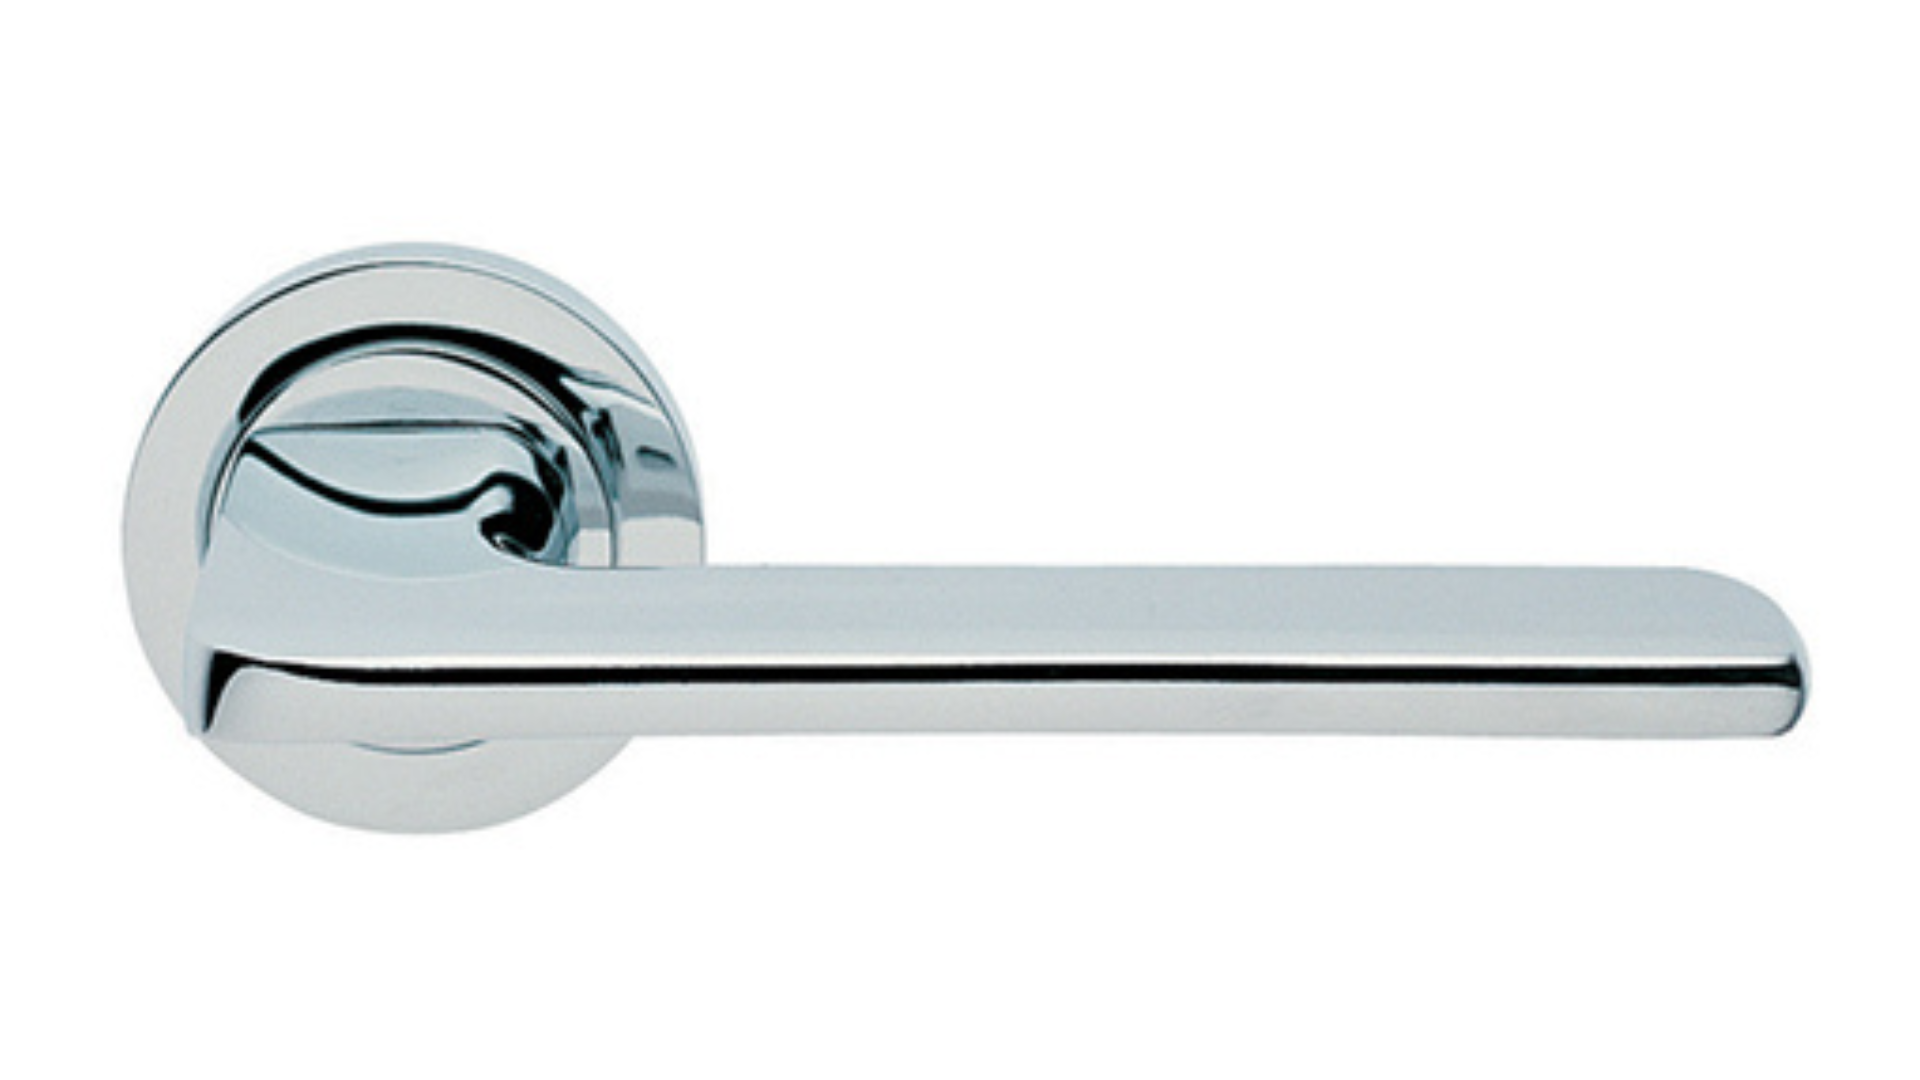 The Blade door handle in polished chrome on a white background.